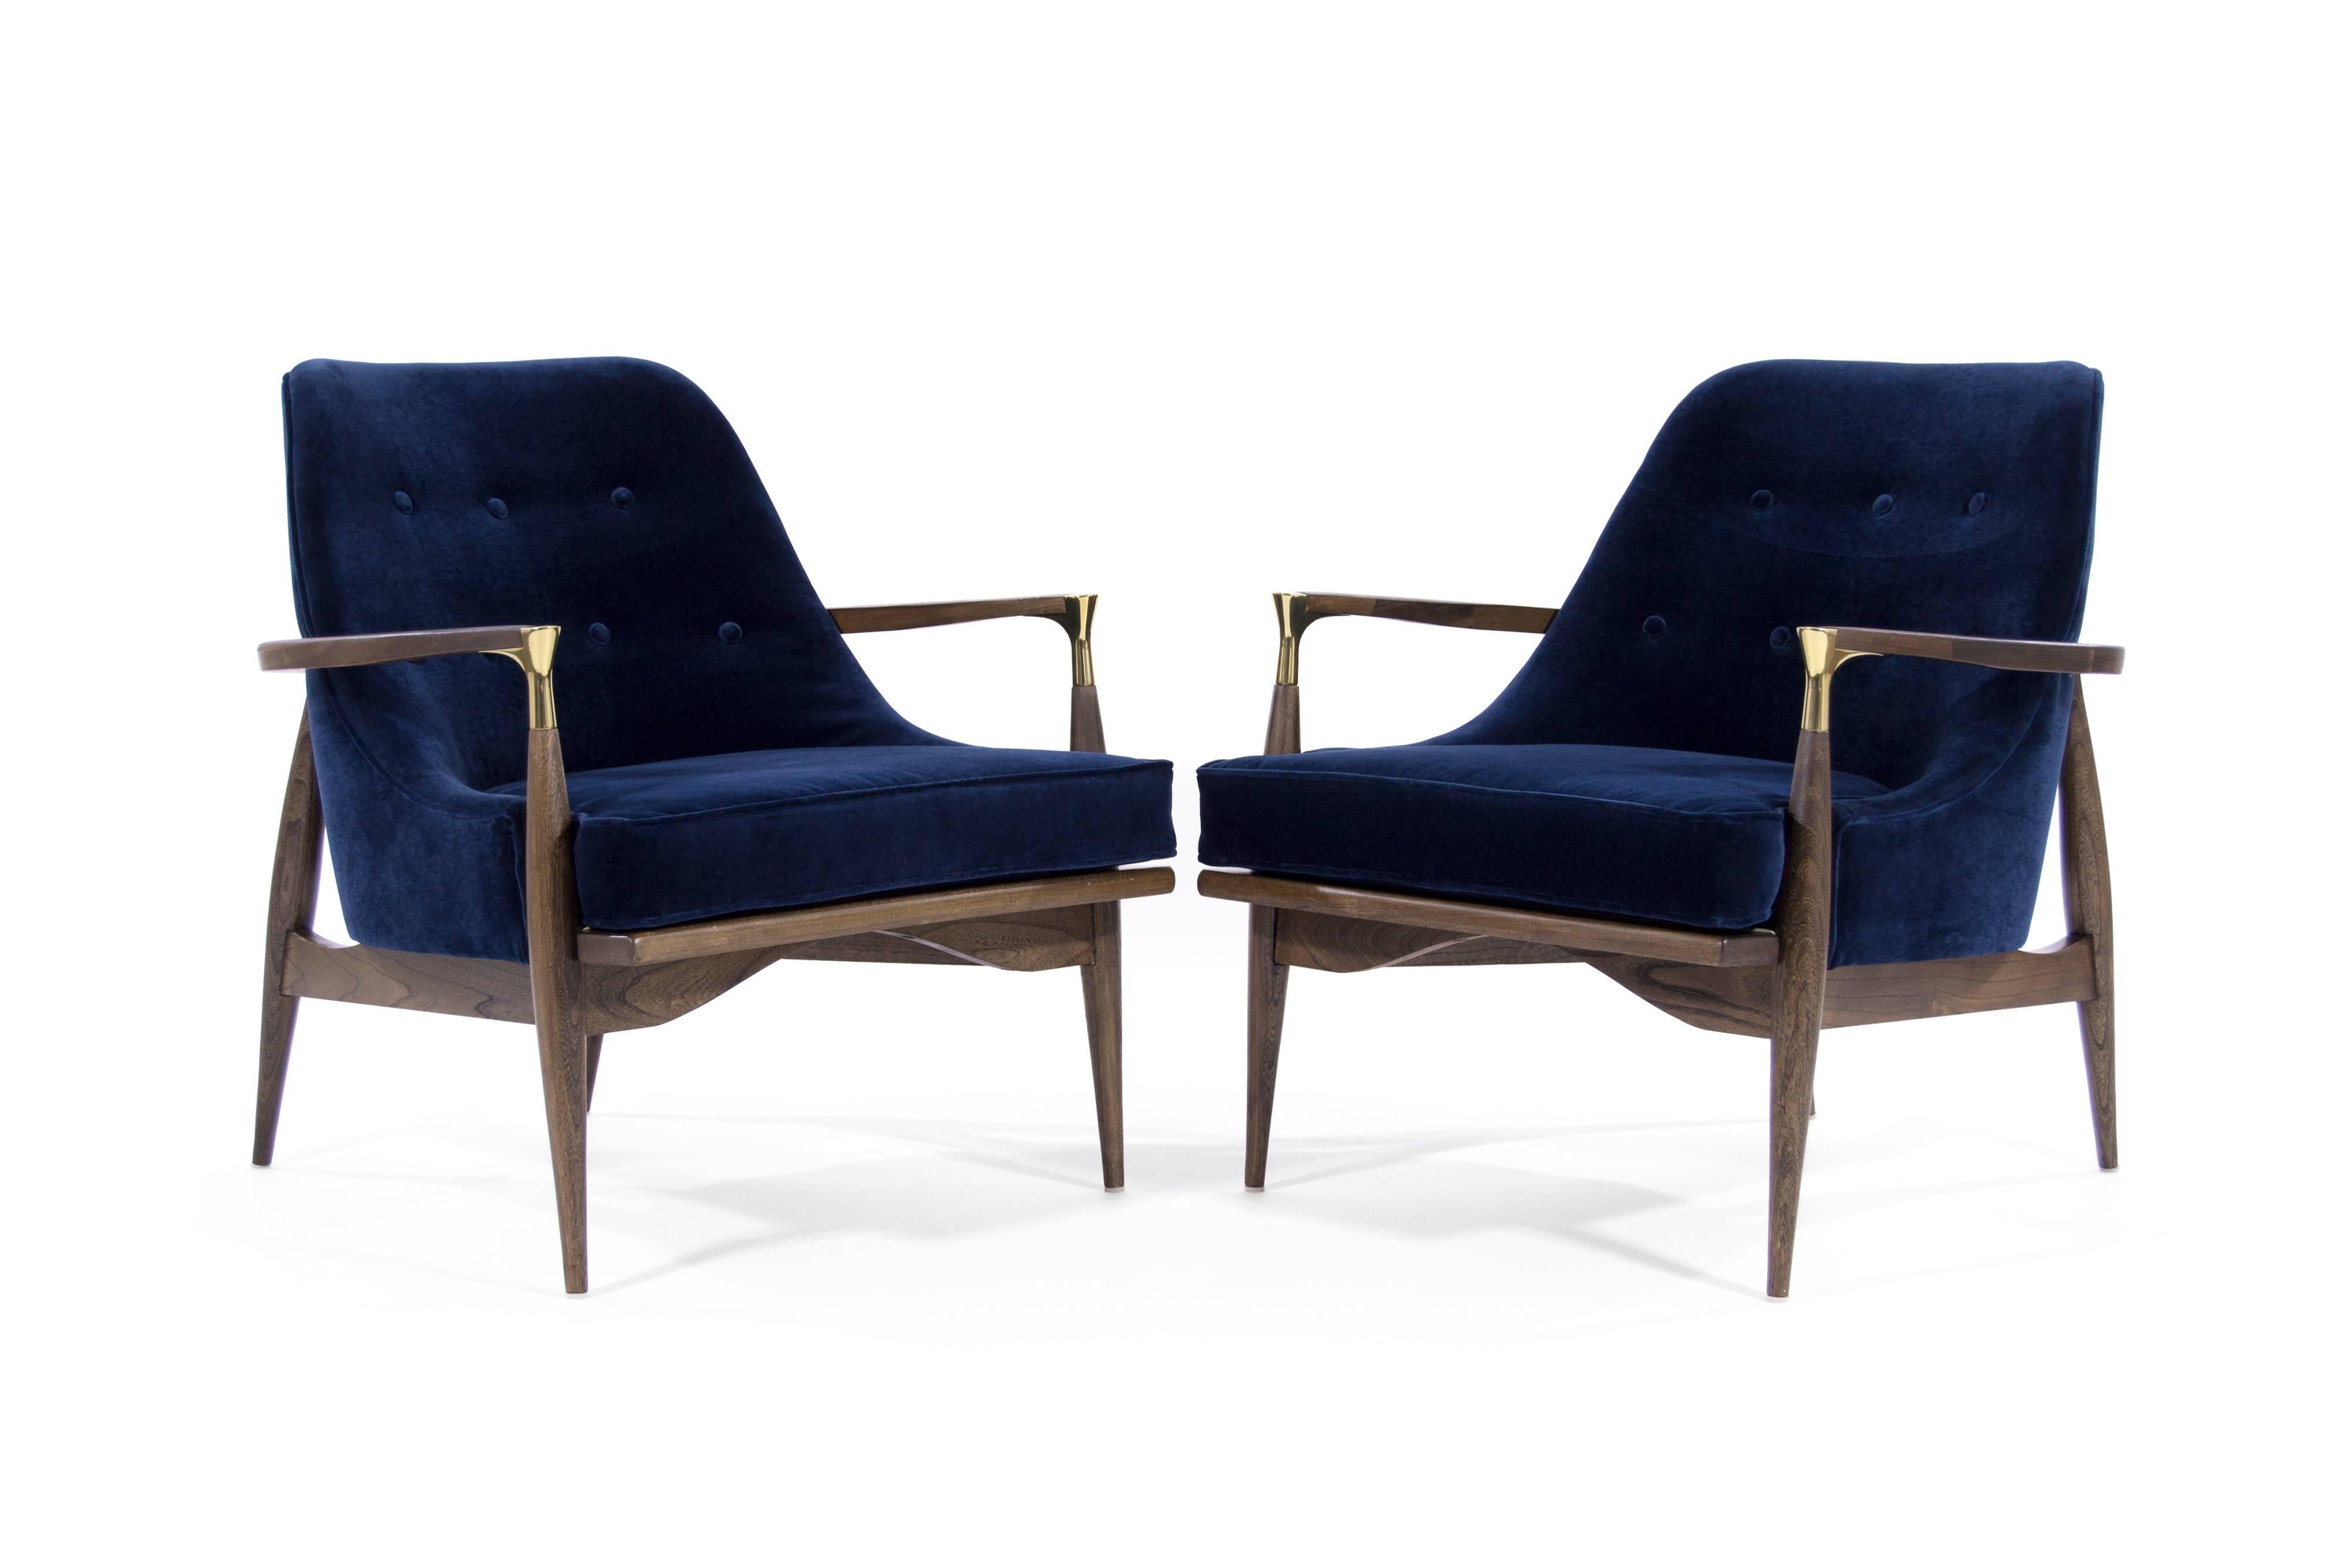 A rare pair of lounge chairs in the style of Ib Kofod-Larsen. Featuring brass details on arms. Newly upholstered in navy blue velvet, sculptural walnut frames completely restored.